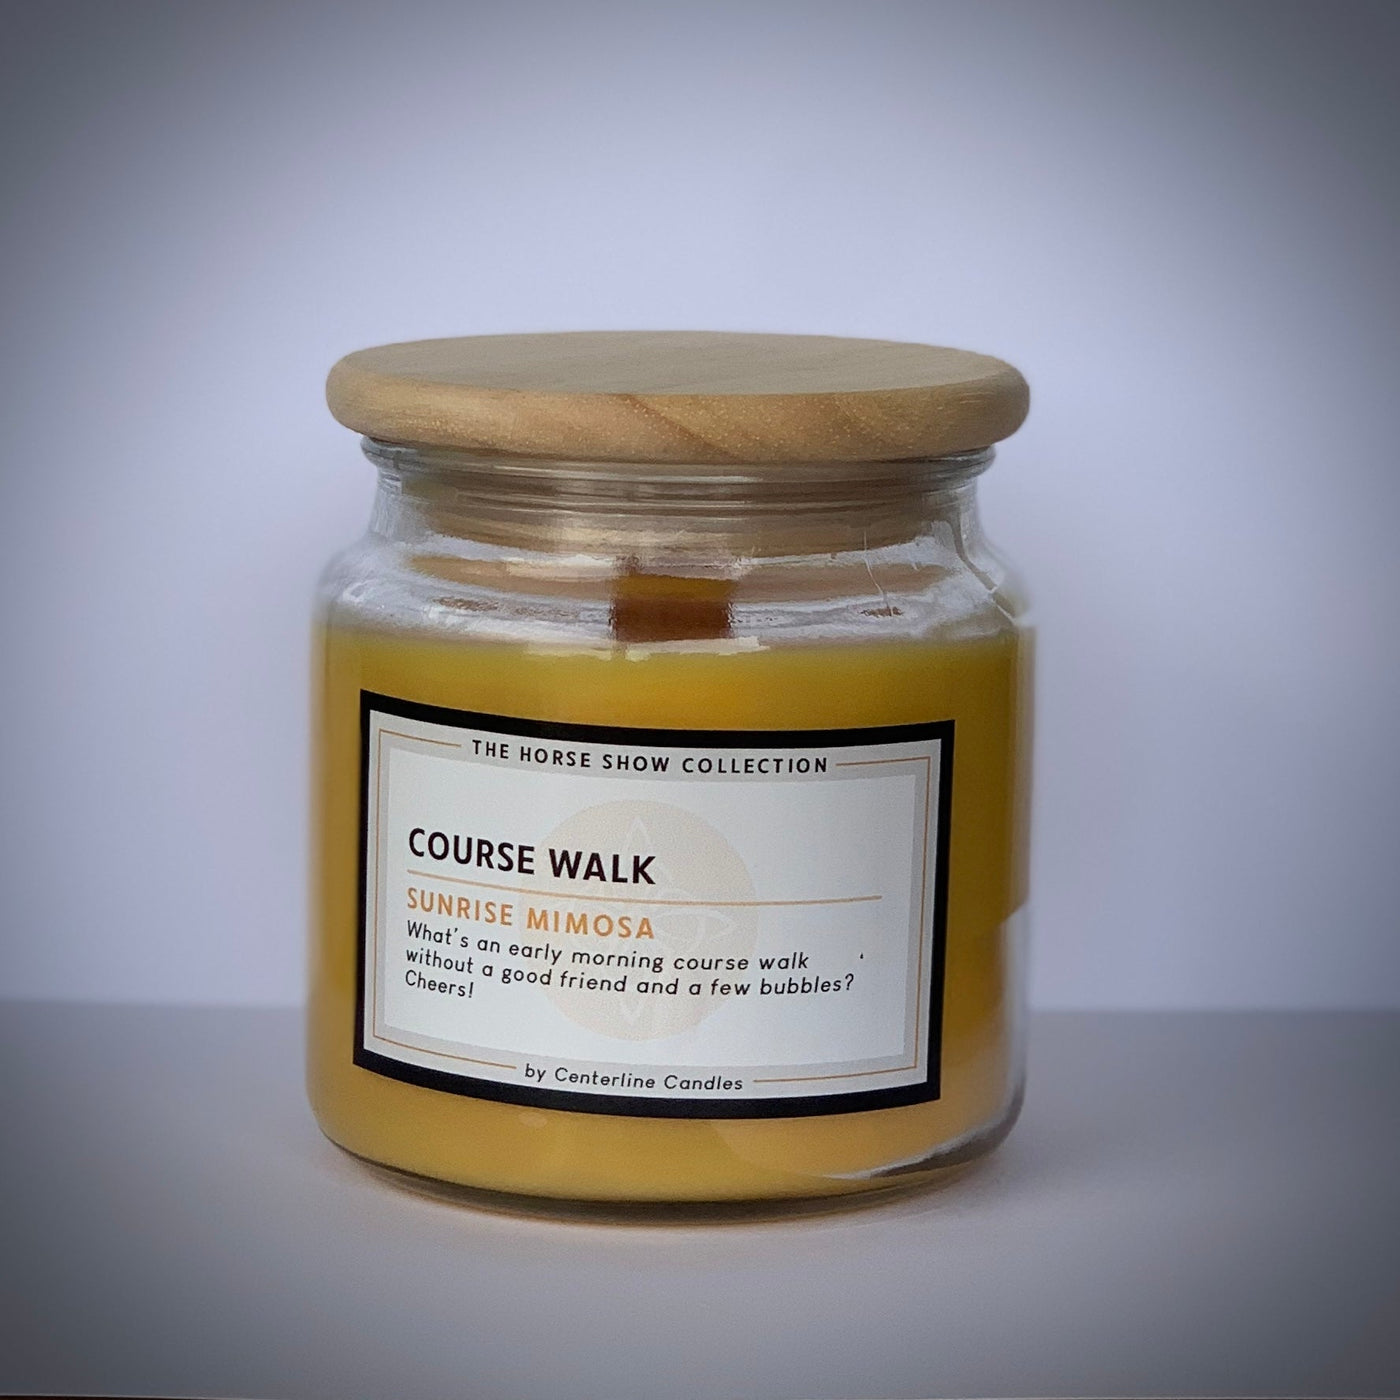 Course Walk by Centerline Candles